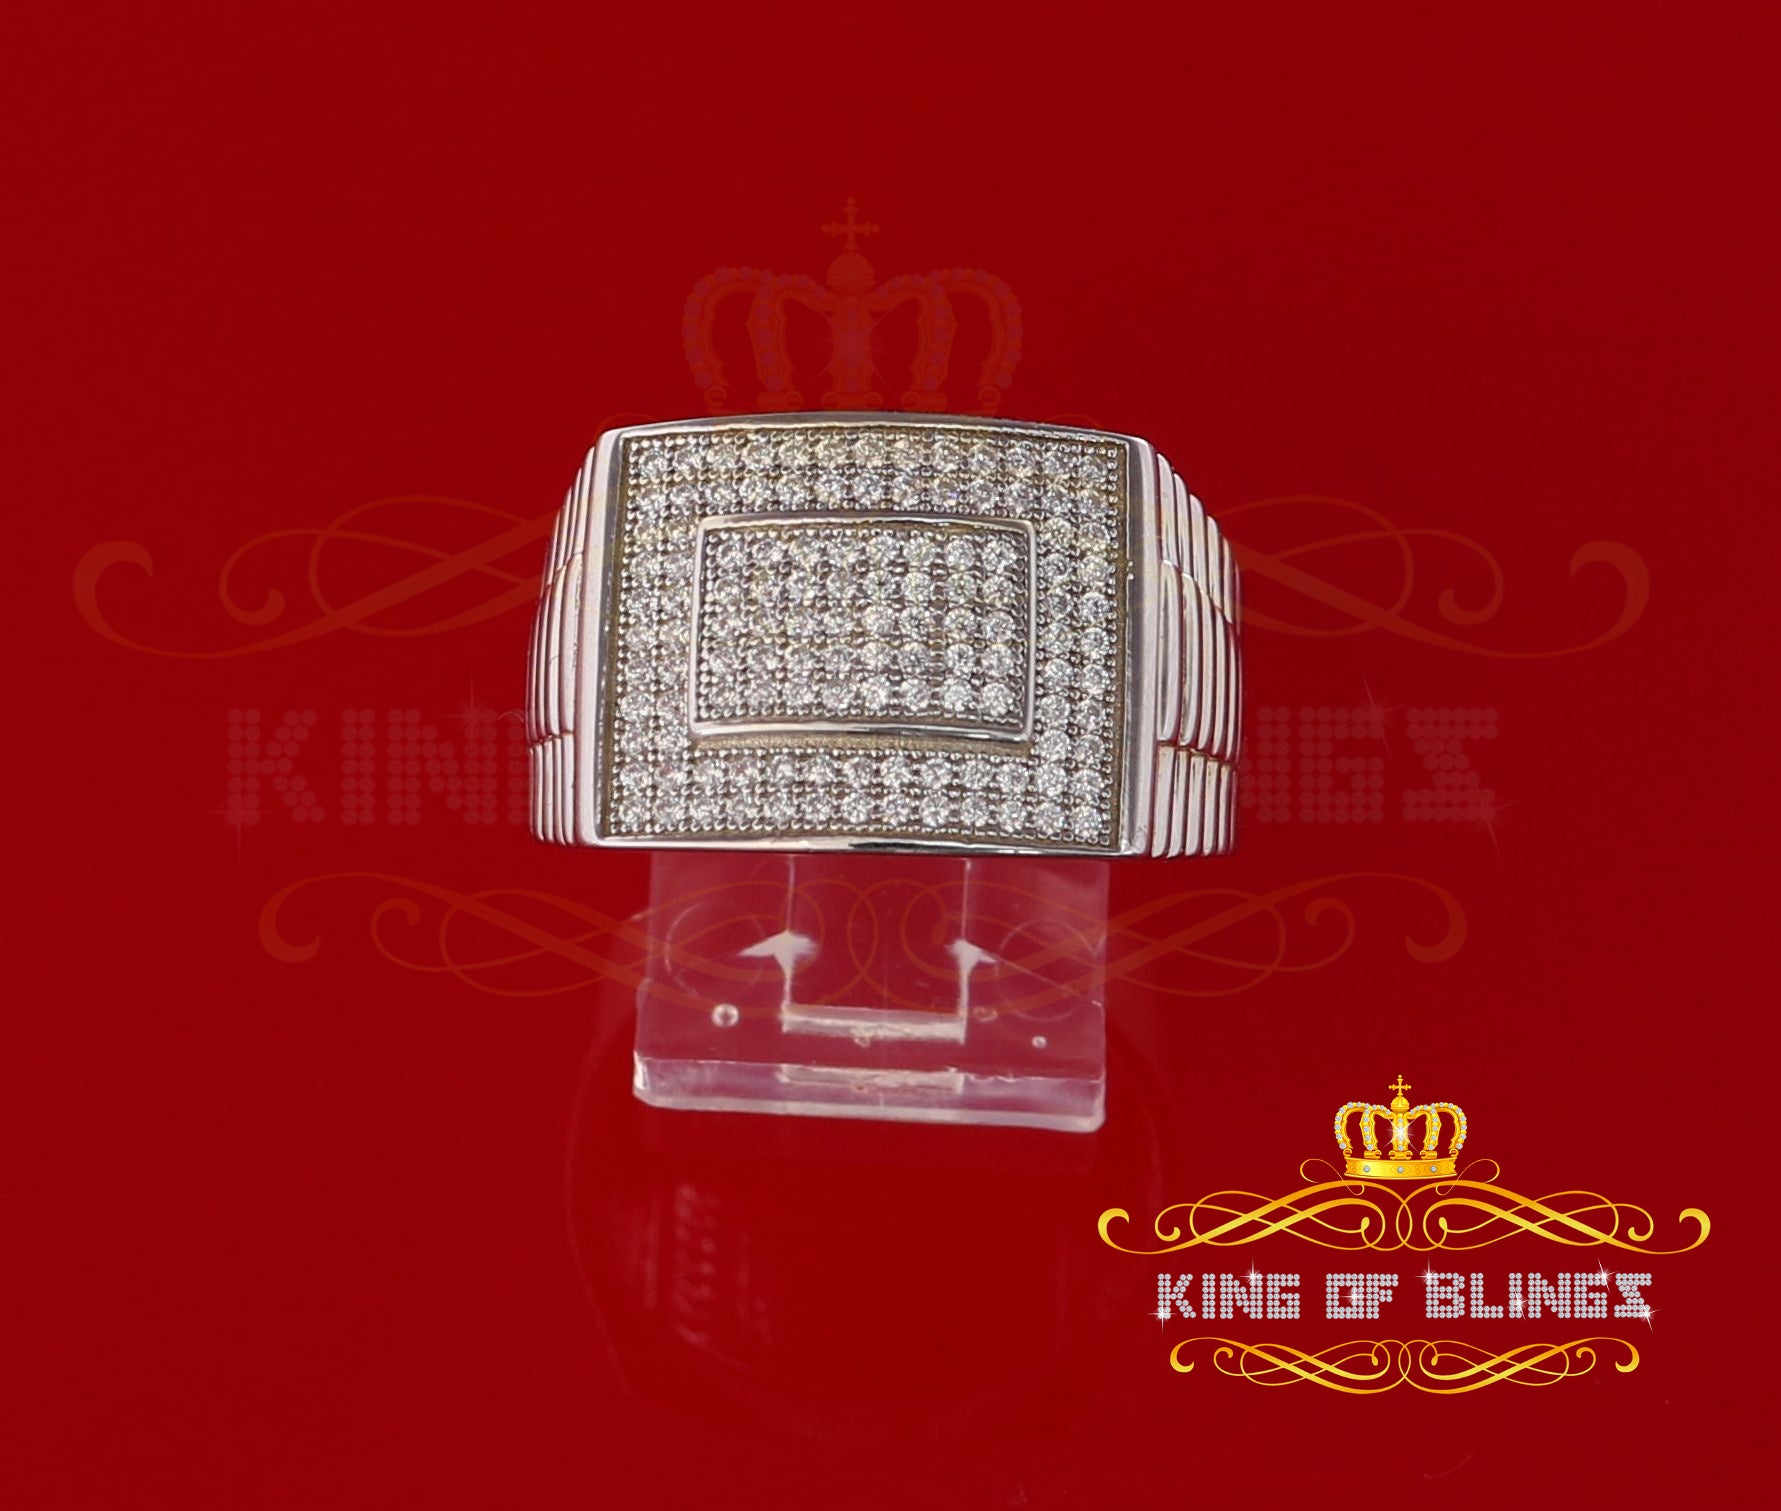 925 Sterling White Silver Square 1.20ct Cubic Zirconia Men's Ring Big Size10 KING OF BLINGS